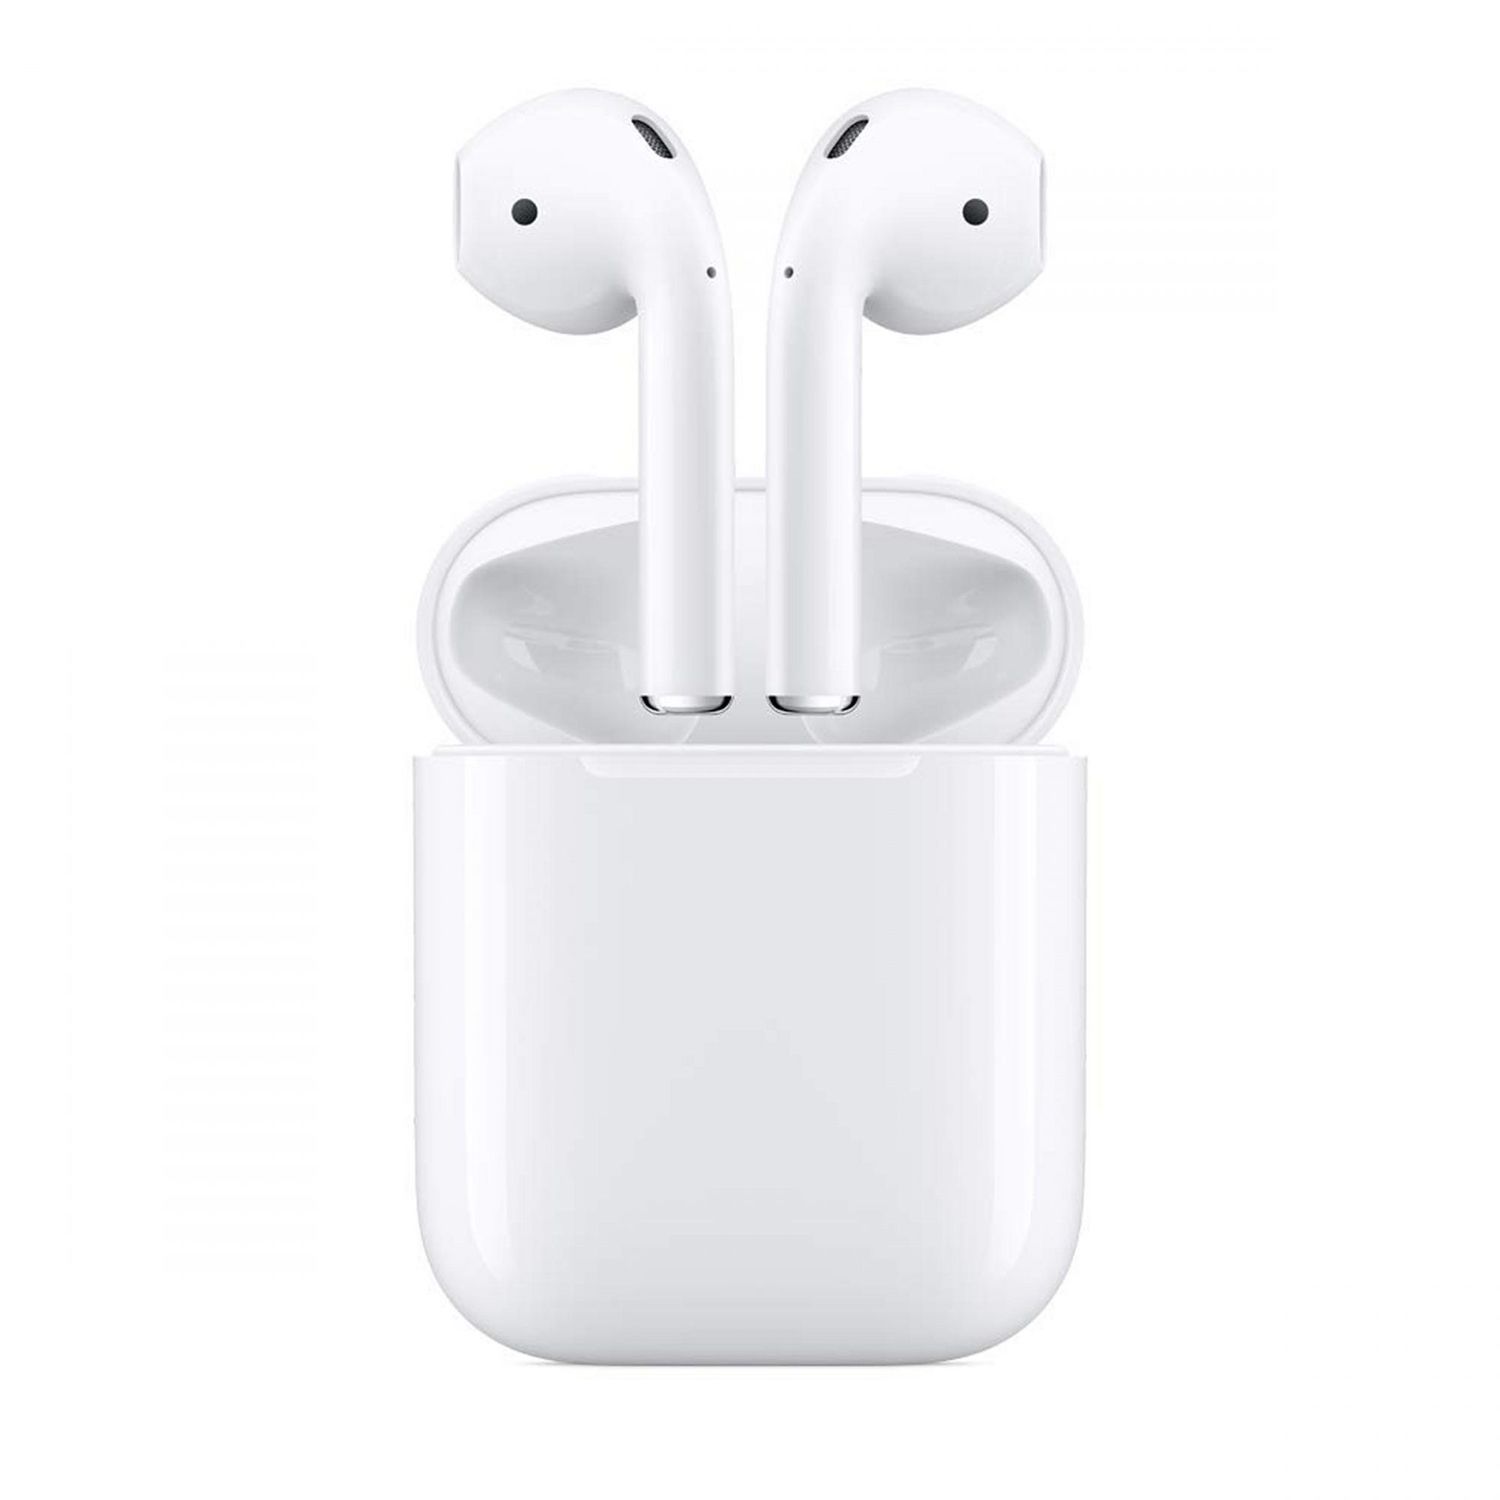 3 Early Black Friday Apple Airpods Deals From Amazon People Com